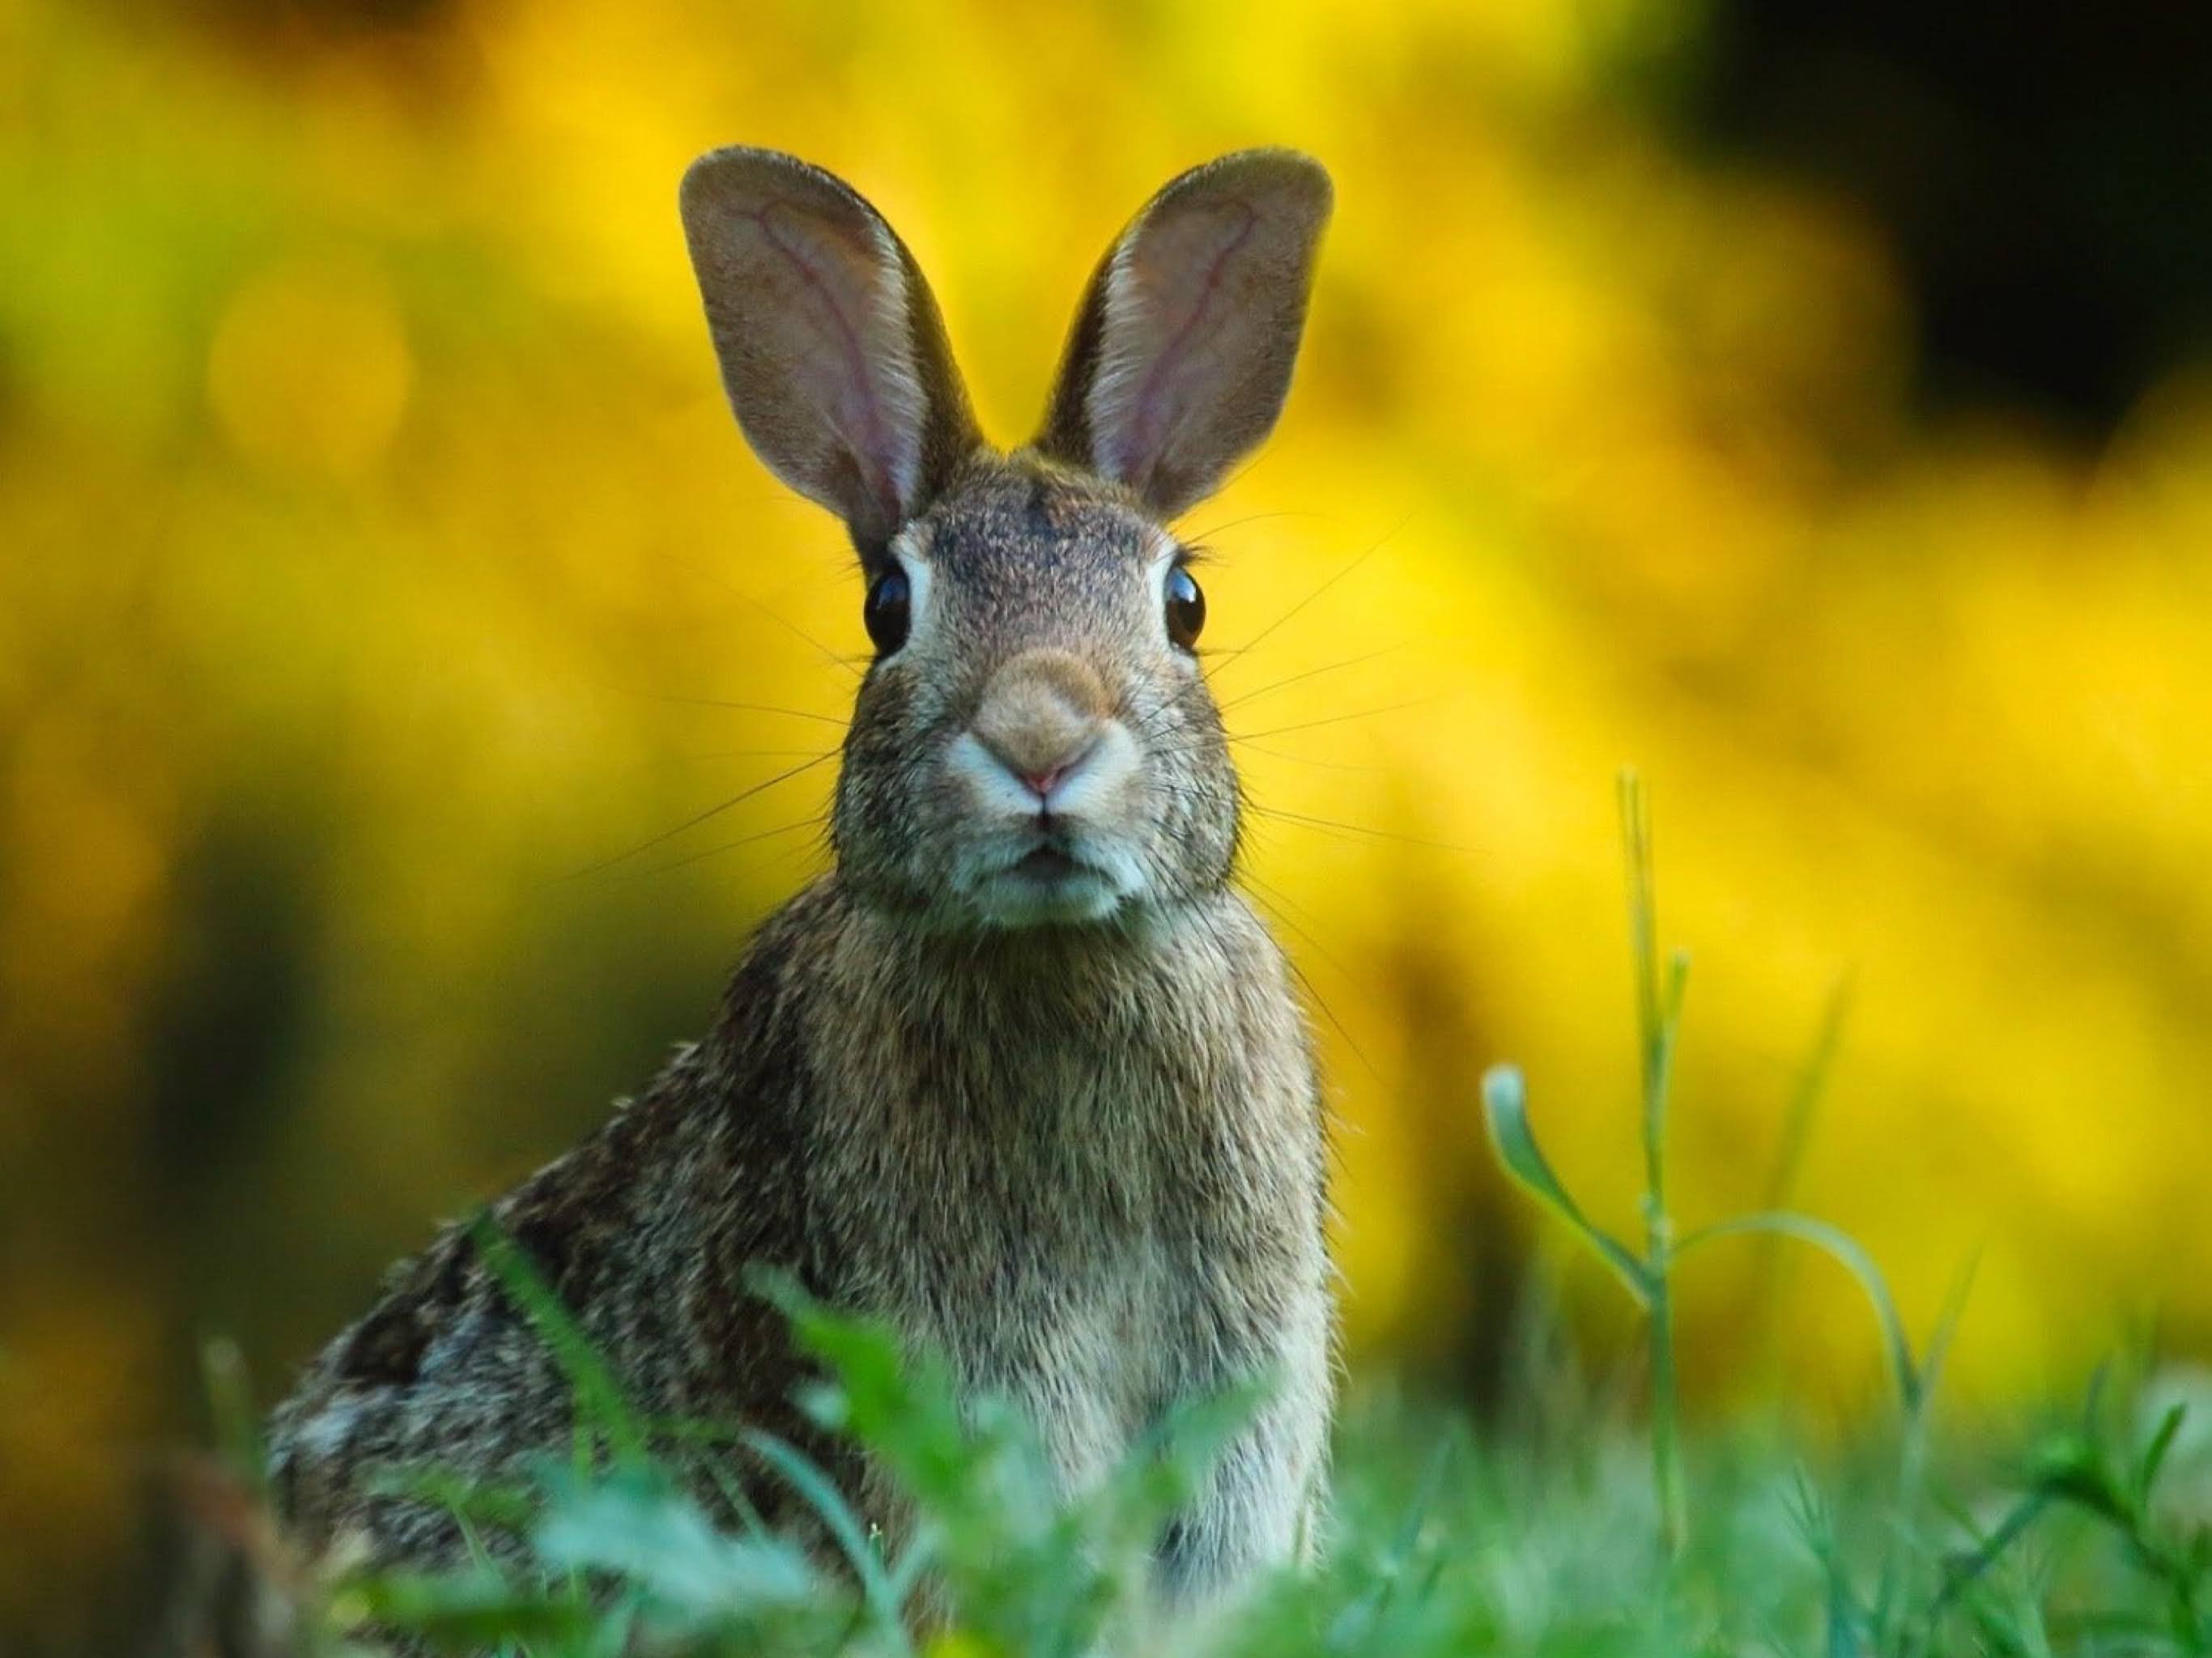 Spring rabbit sitting in a green field, the background are blurred yellow flowers